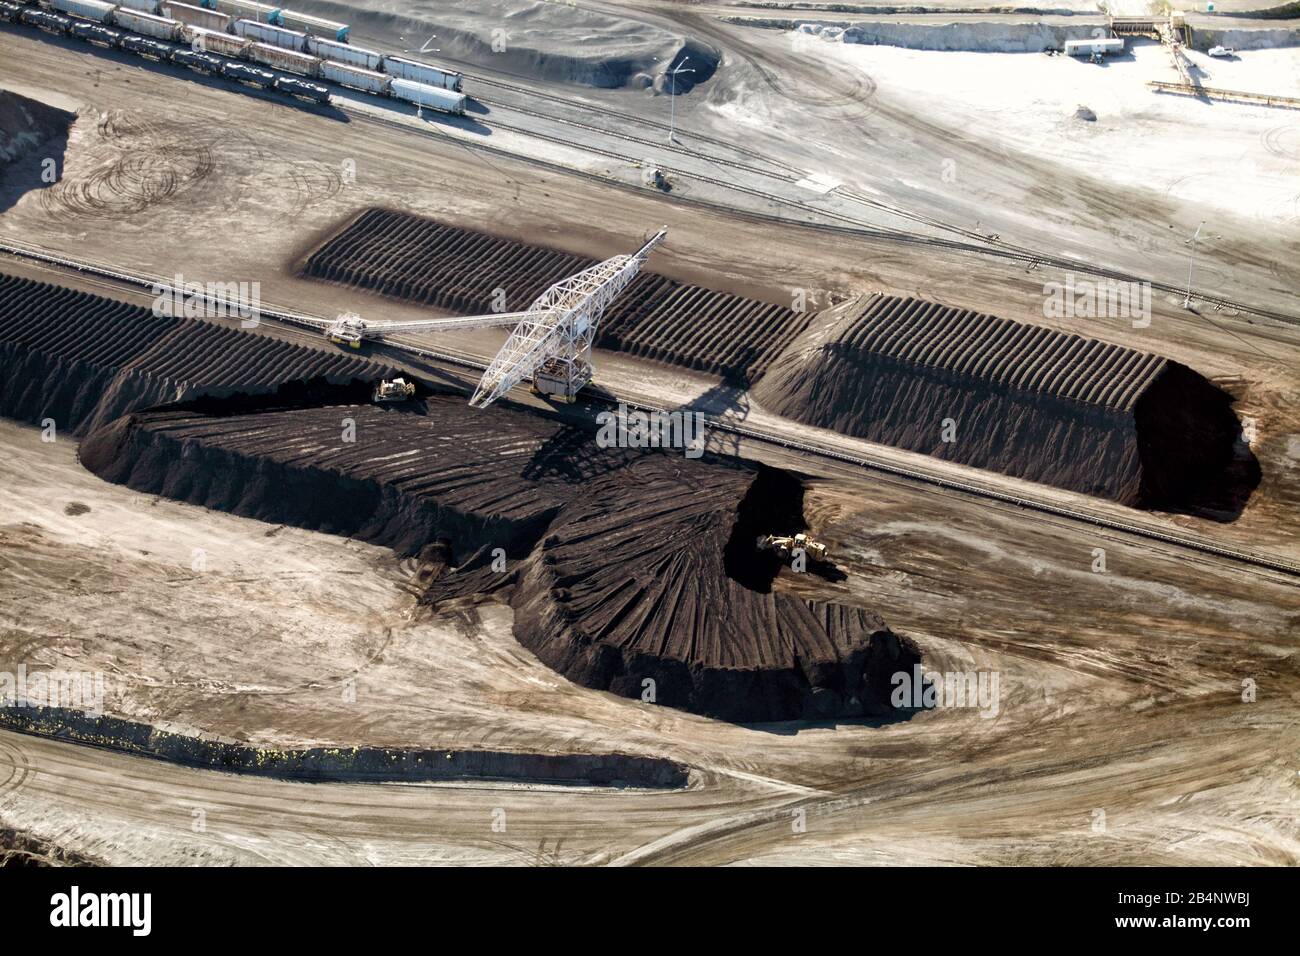 An aerial view of the piler making piles of phosphate ore at the Monsanto phosphate mine processing facility near Soda Springs Idaho. Stock Photo